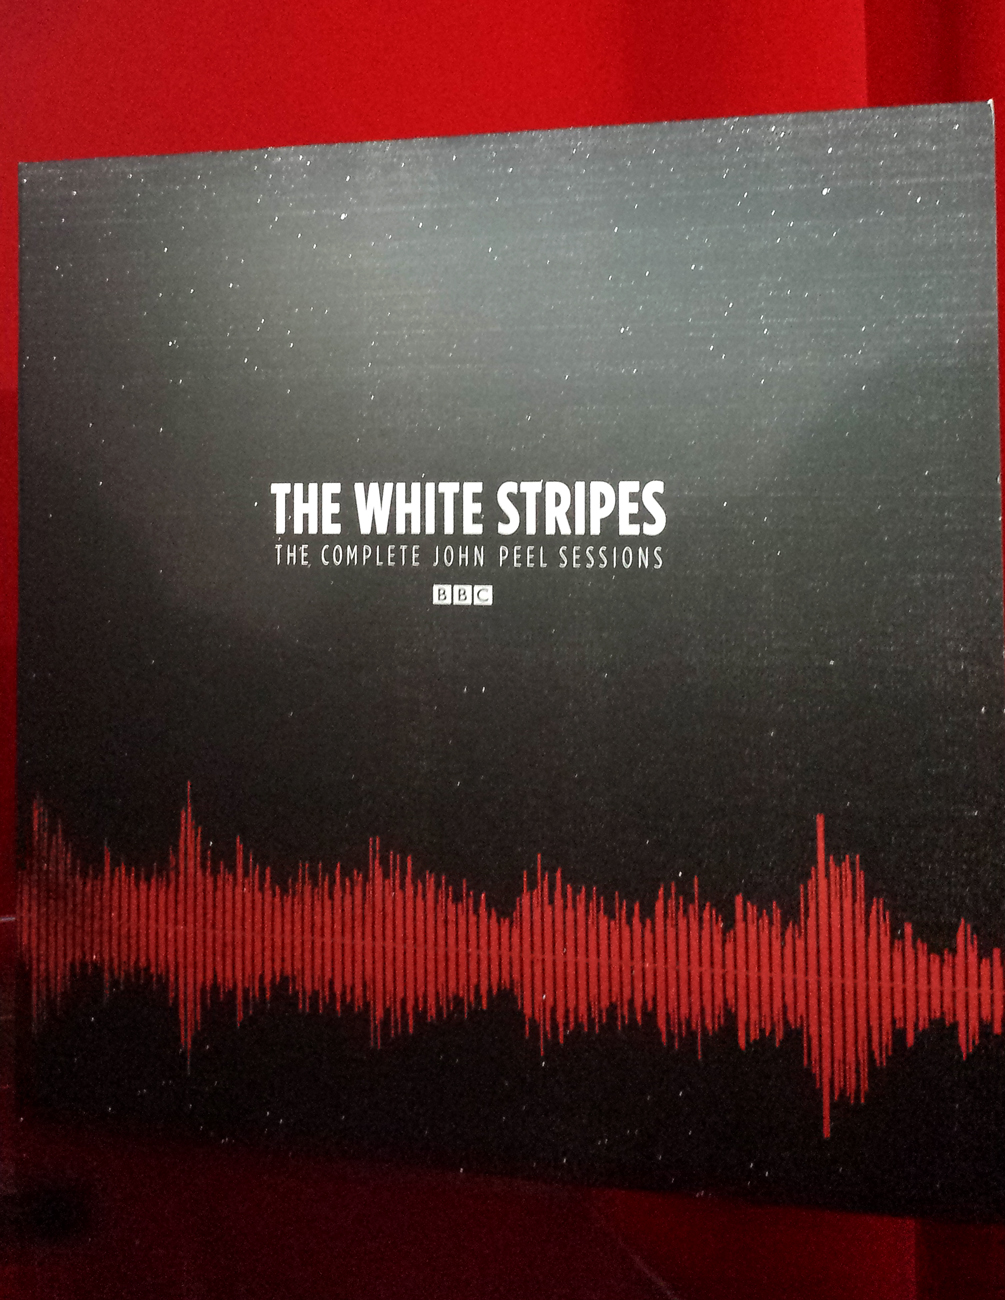 The White Stripes The Complete John Peel Sessions album cover. Photo by: Matthew McGuire